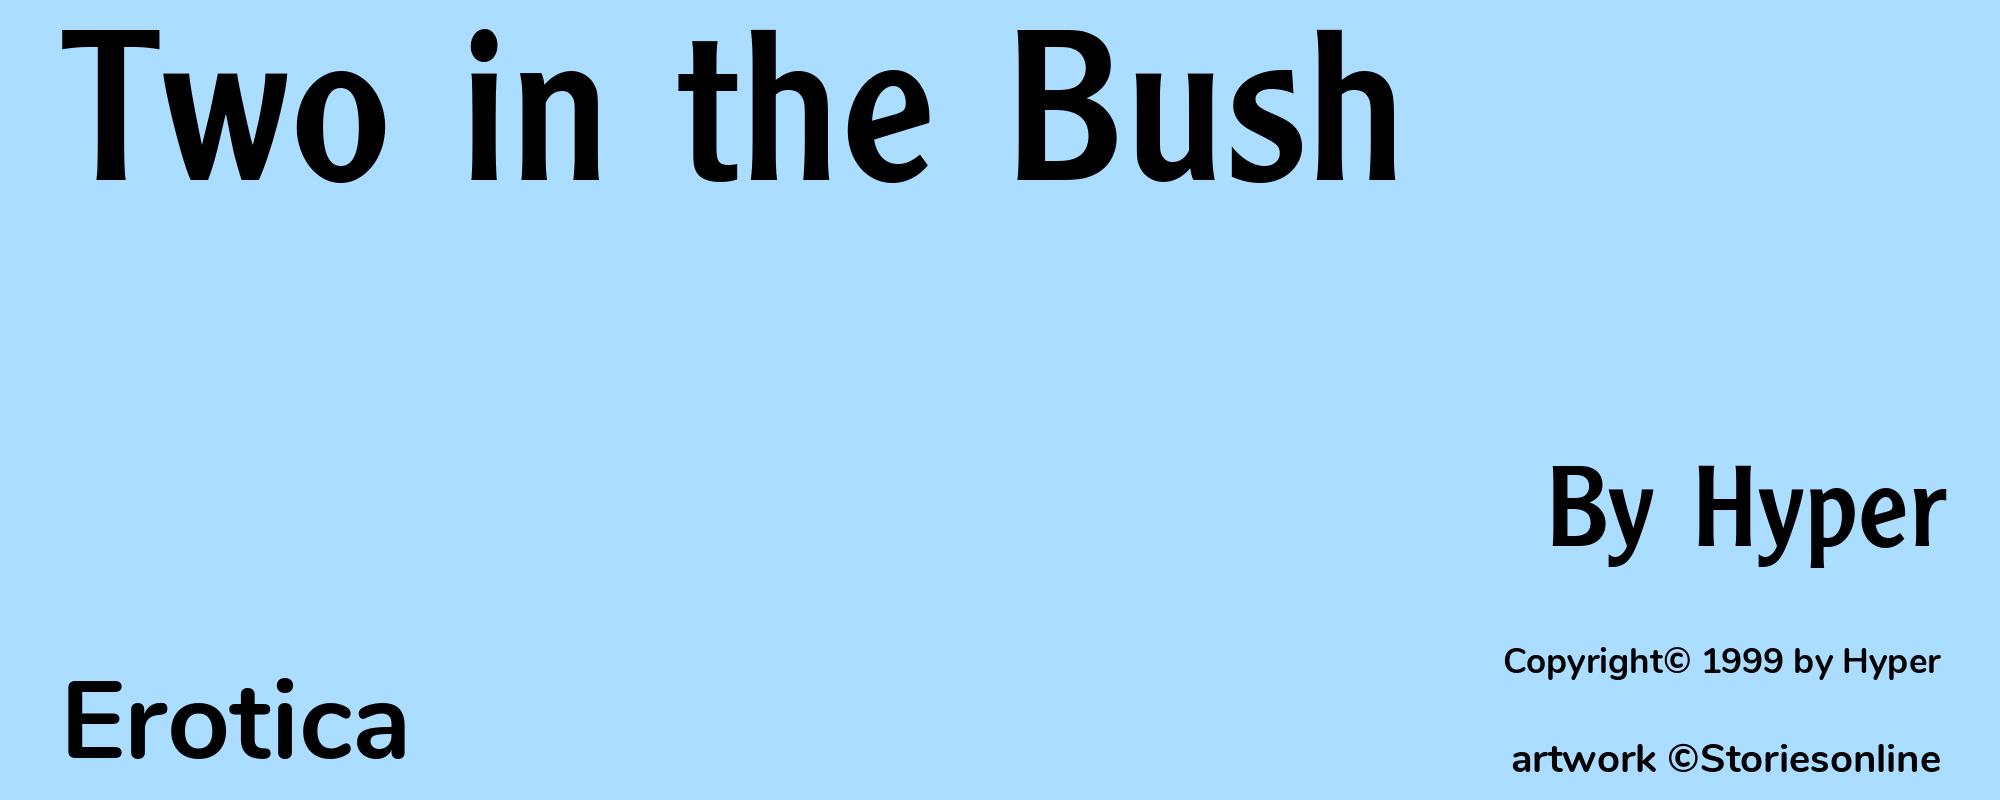 Two in the Bush - Cover